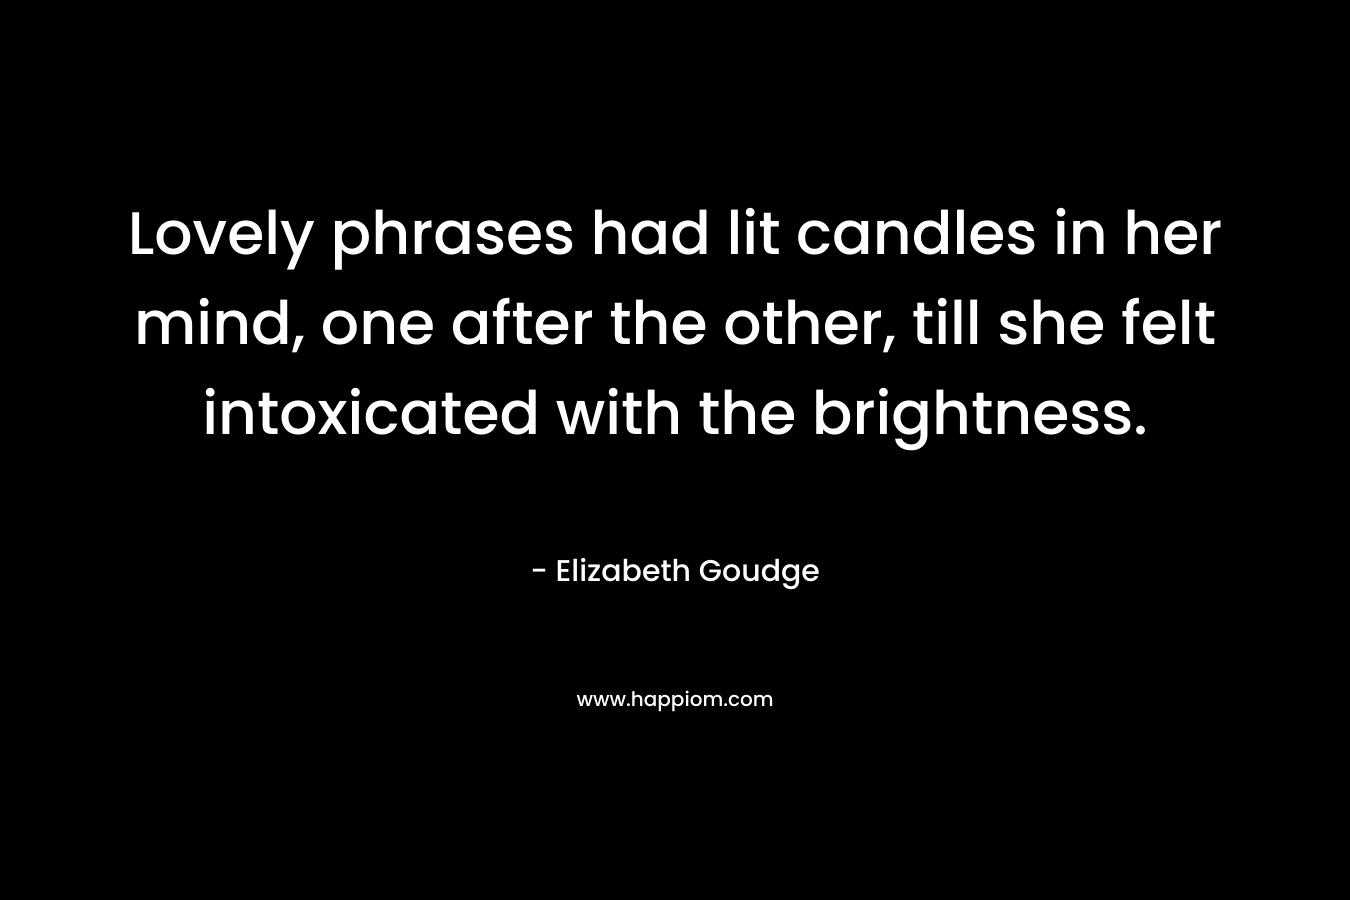 Lovely phrases had lit candles in her mind, one after the other, till she felt intoxicated with the brightness. – Elizabeth Goudge